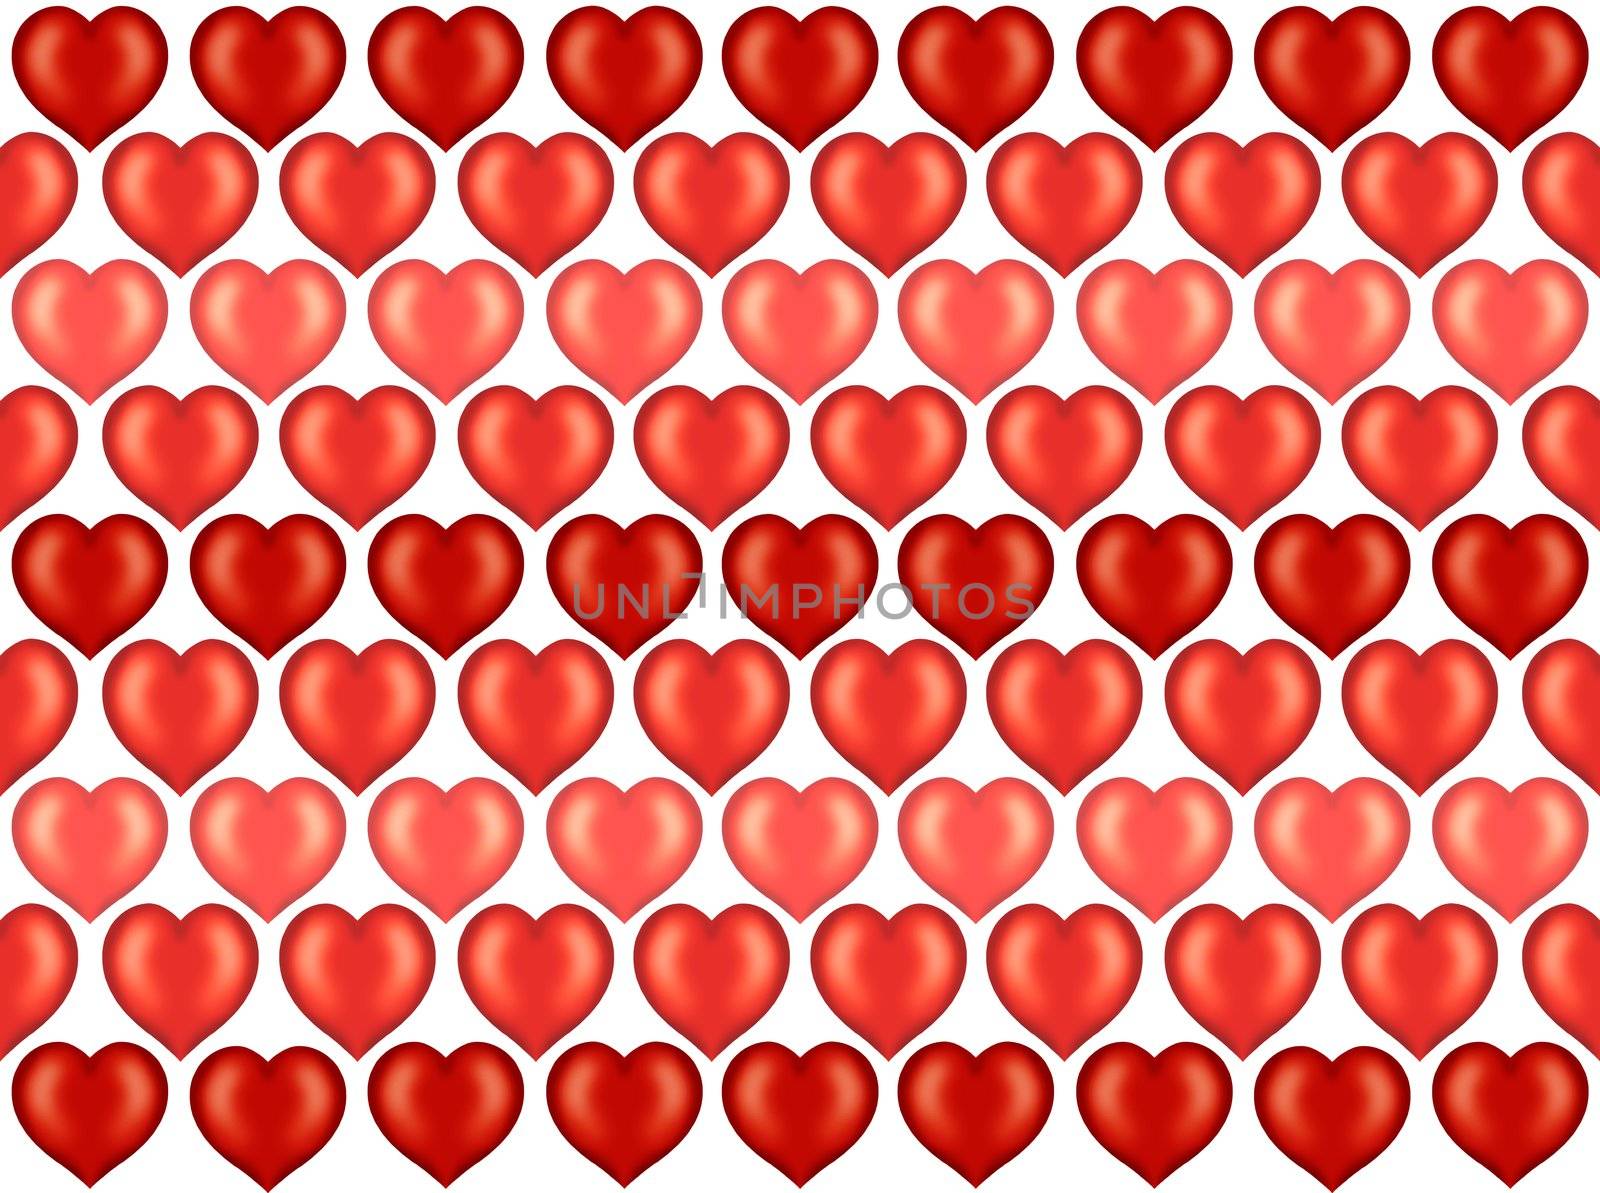 Wallpaper of red hearts isolated on a hwite background